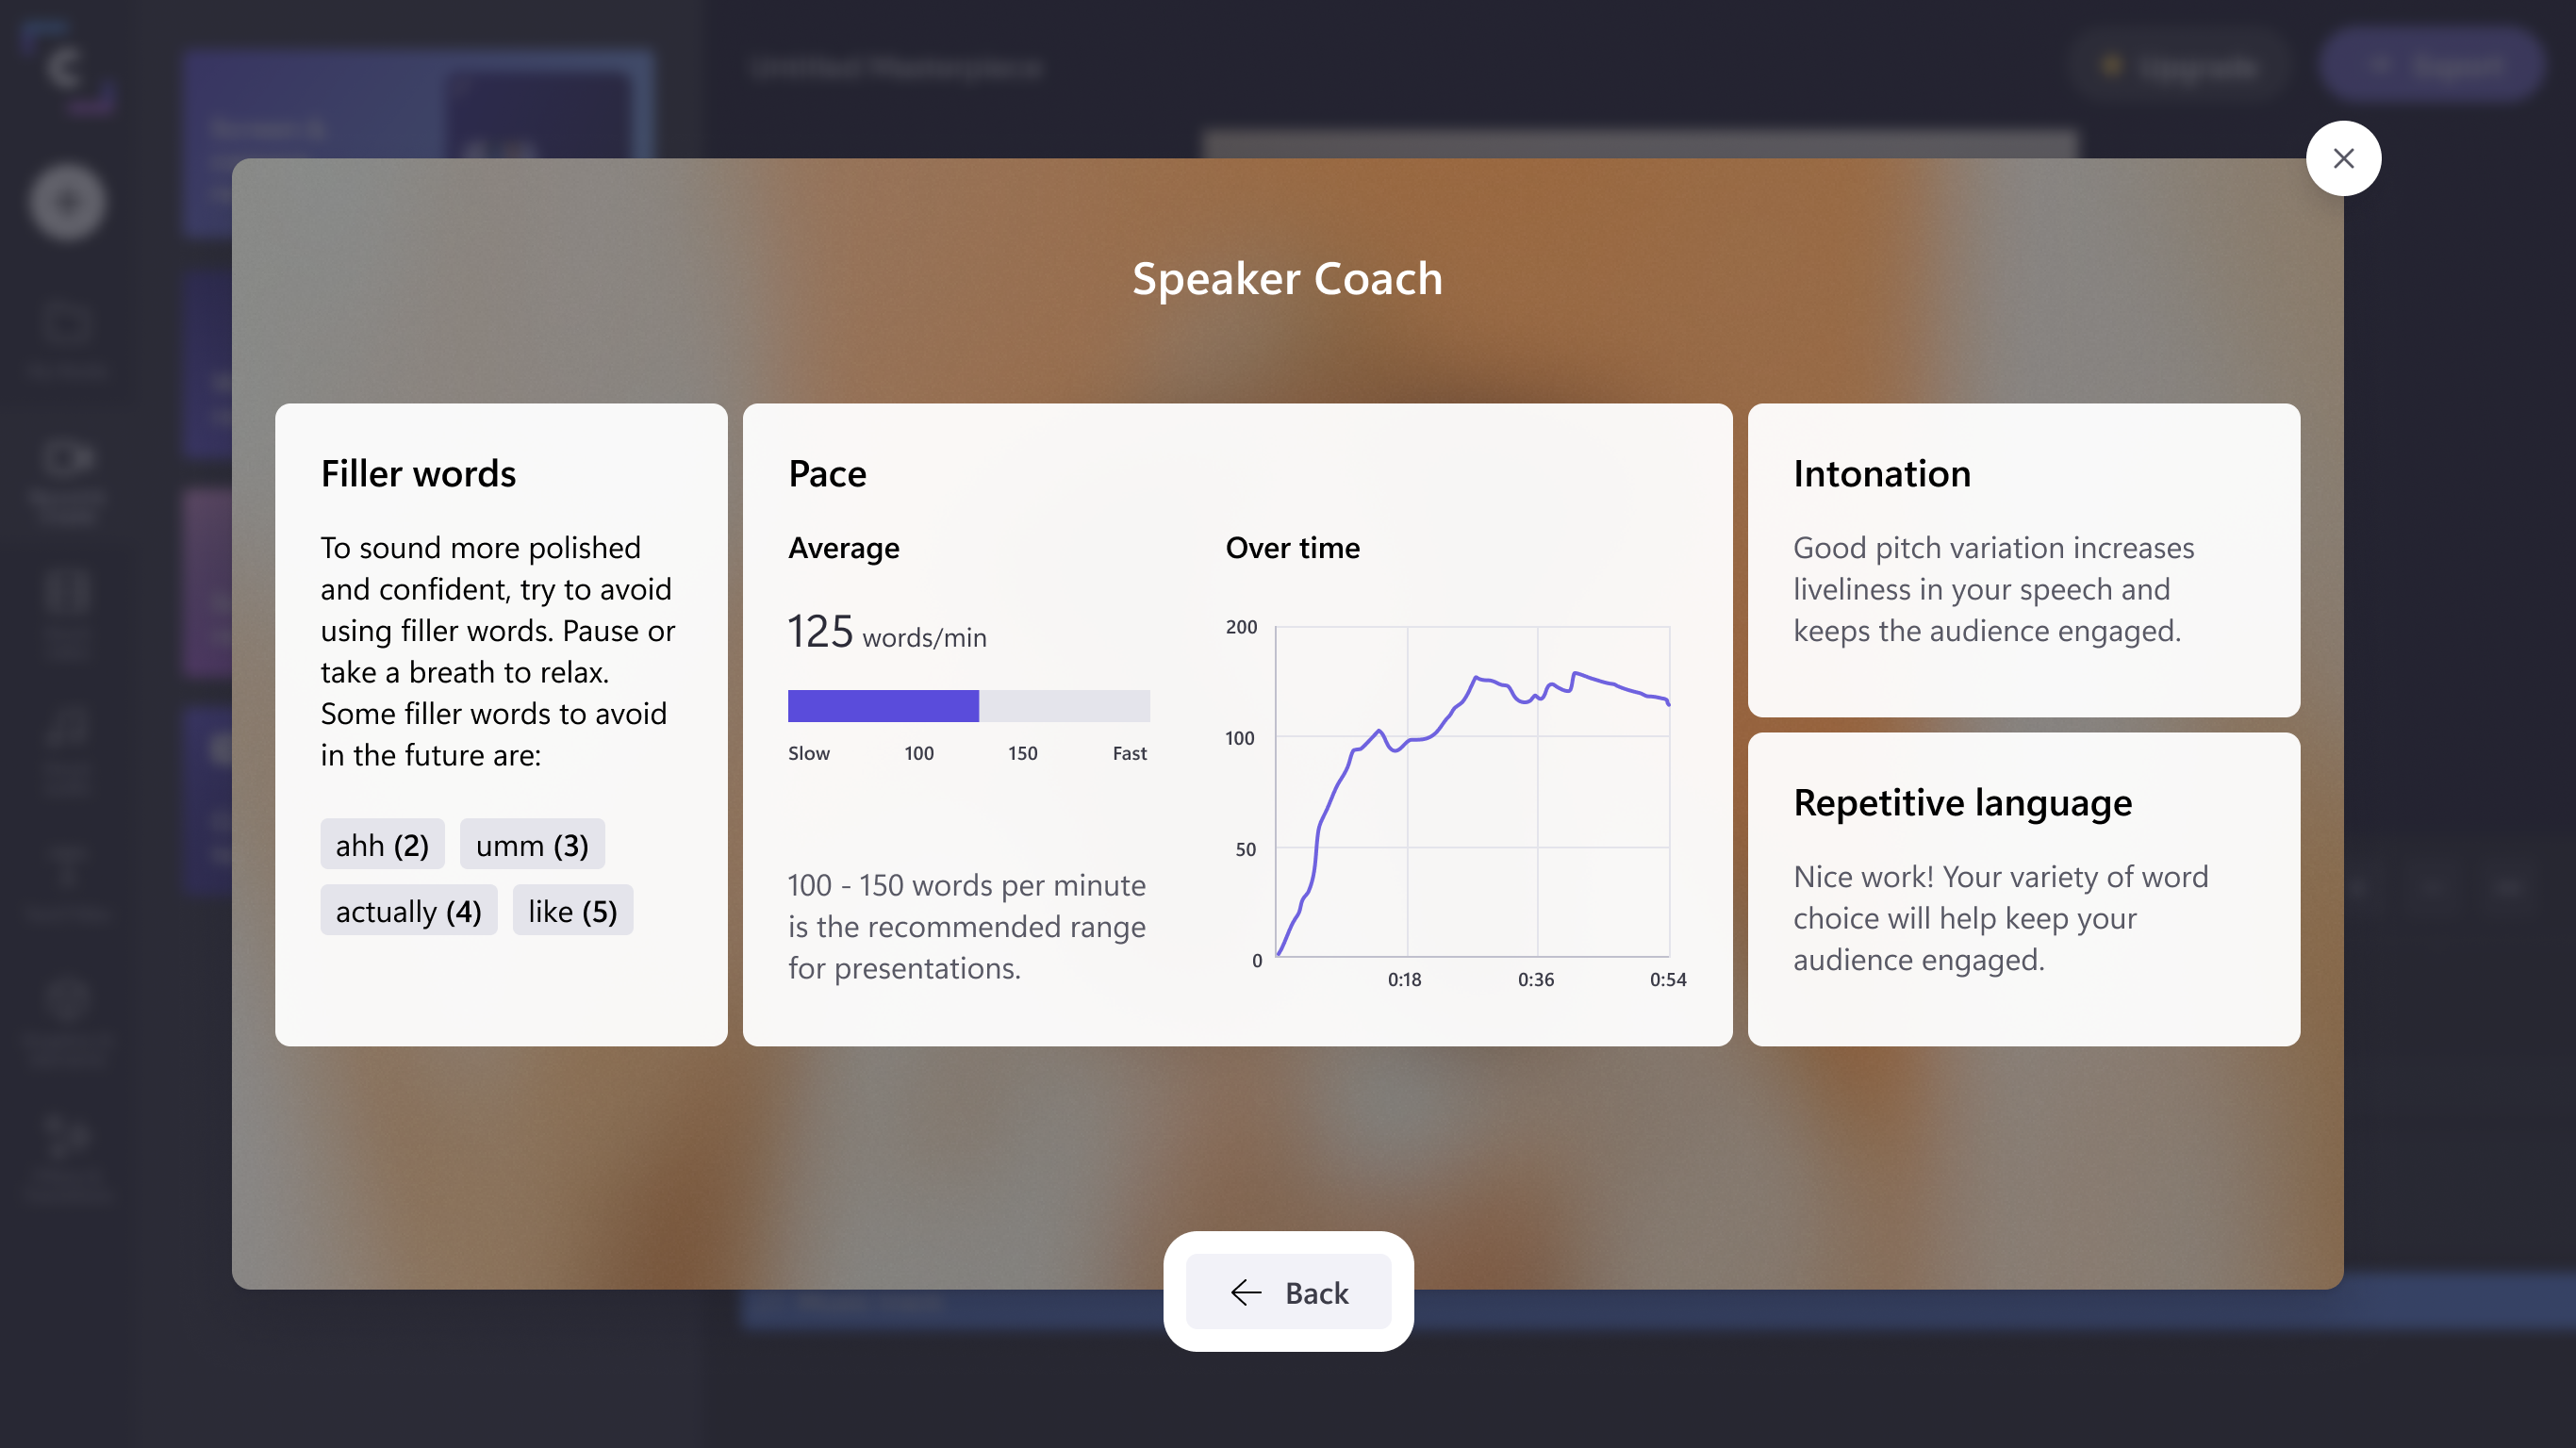 Review speaker coach analysis